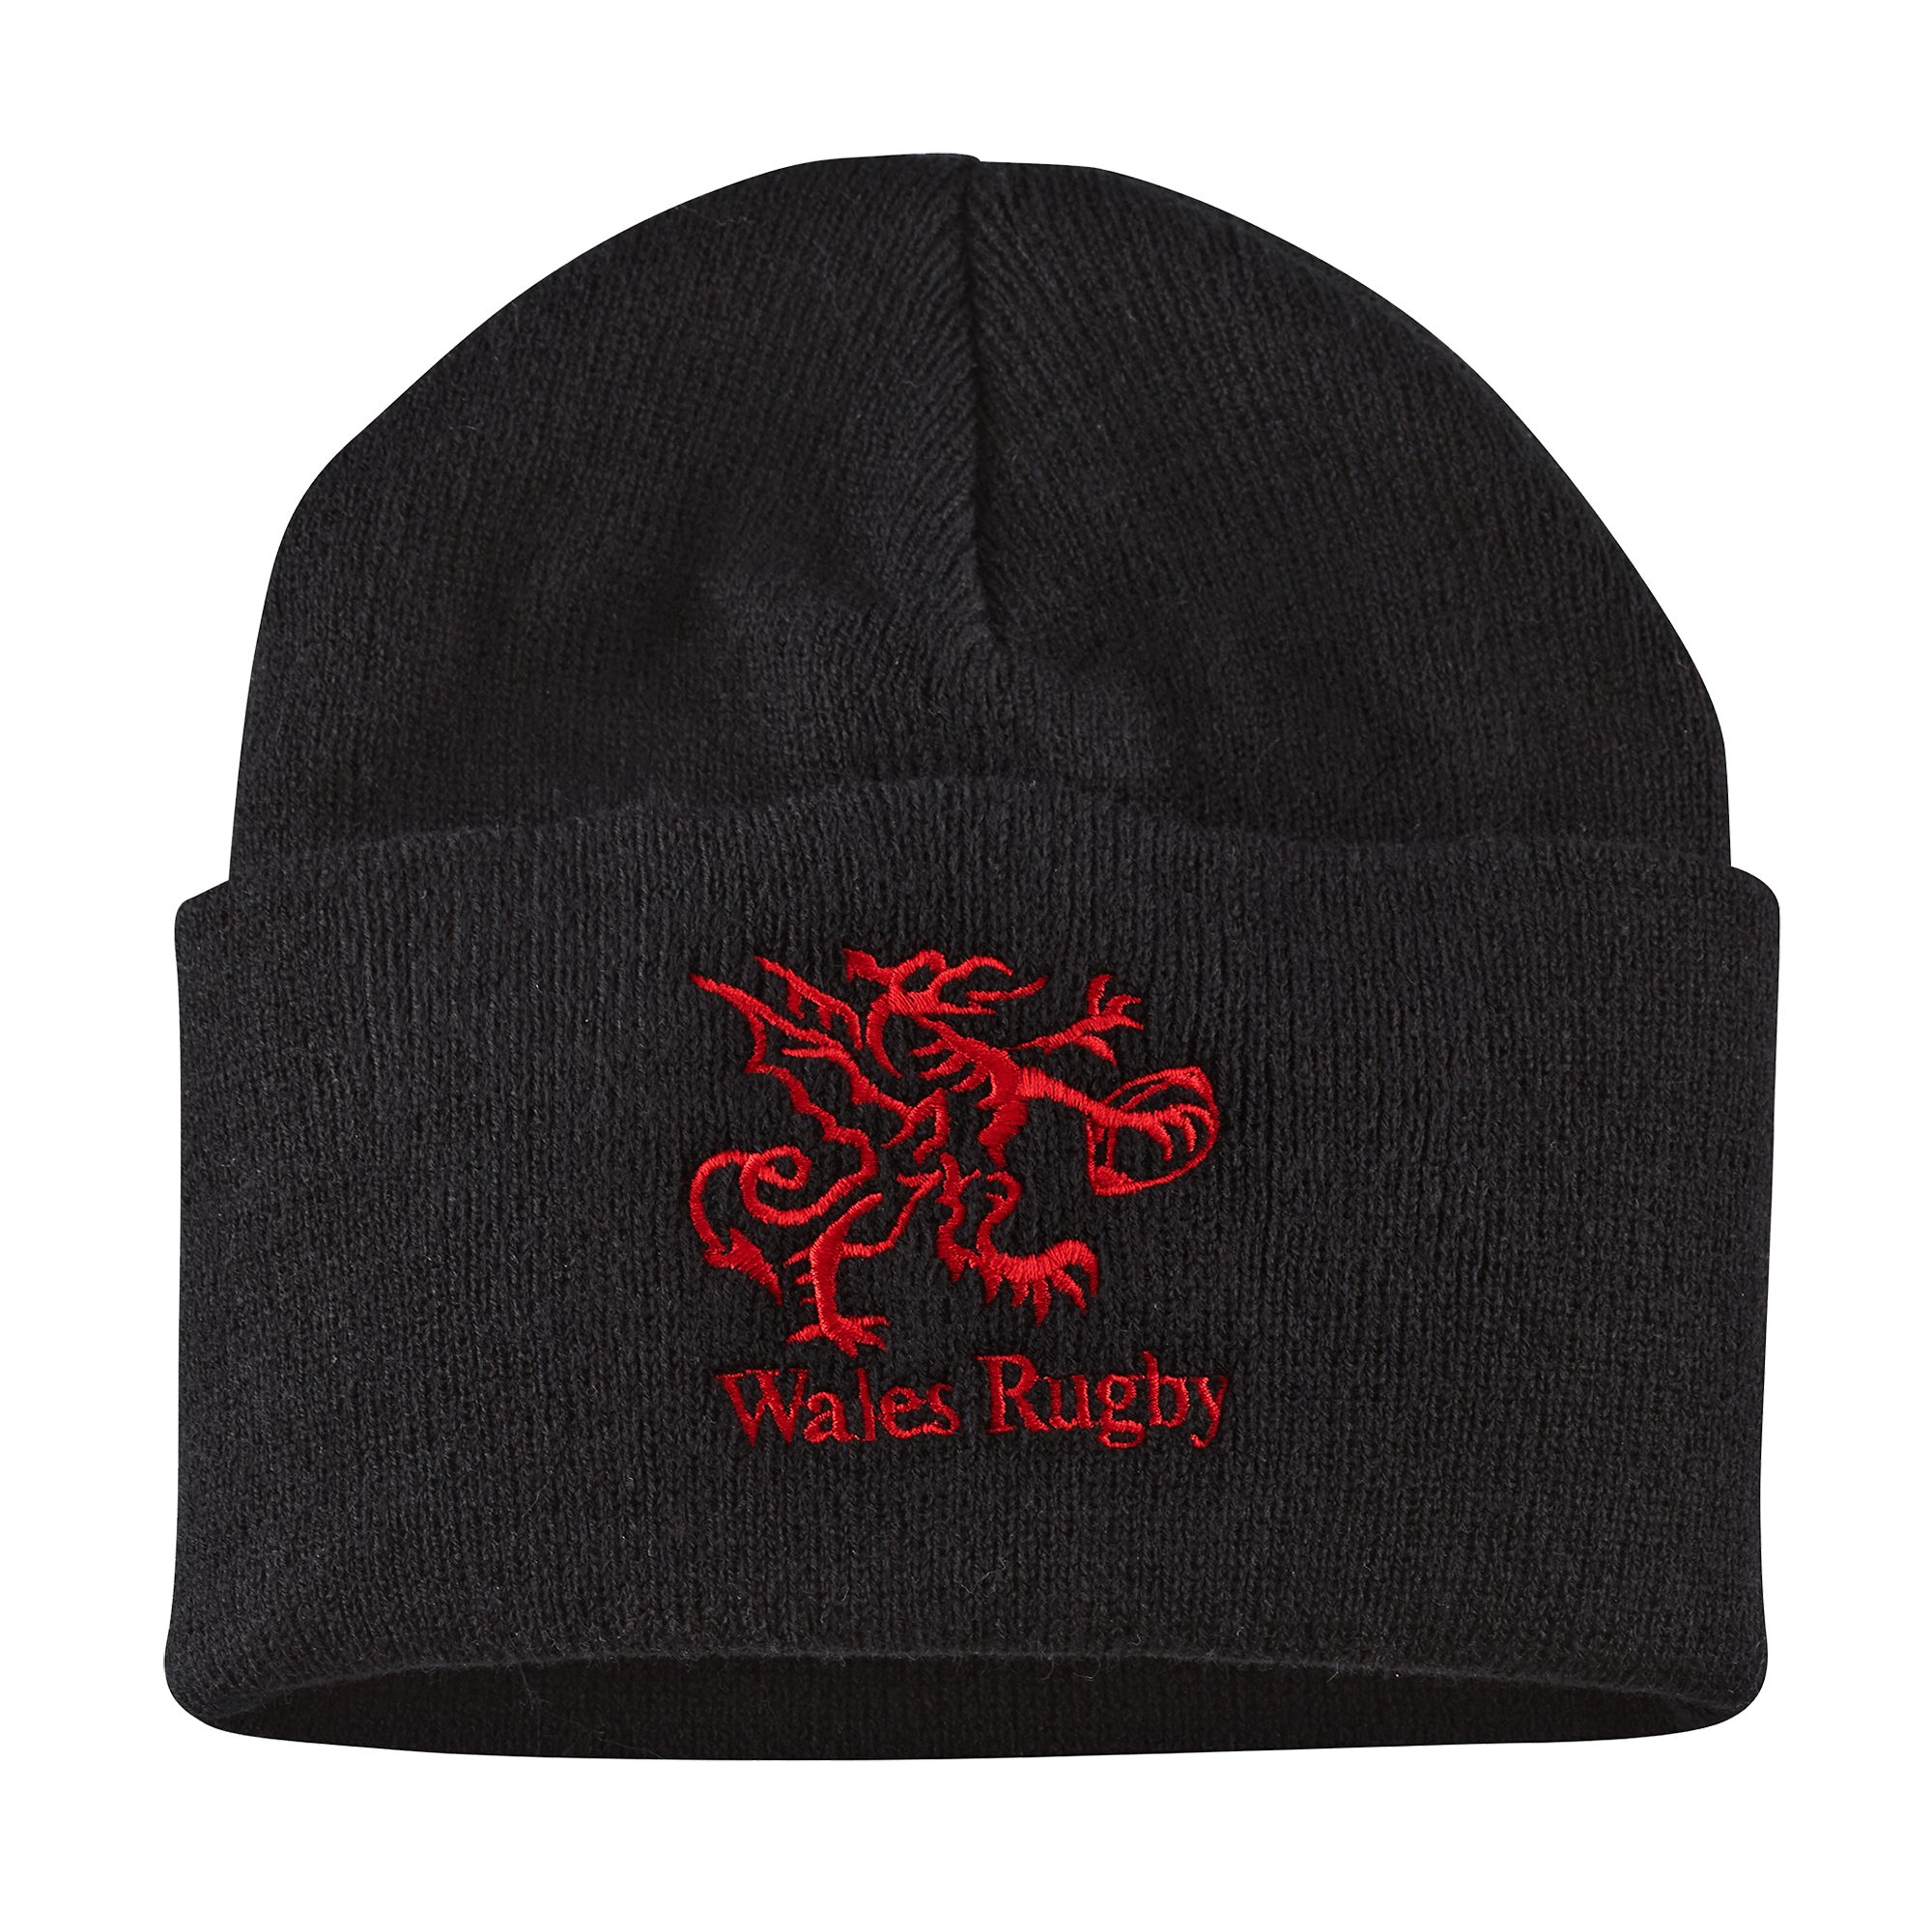 Rugby Imports Wales Rugby Knit Cap